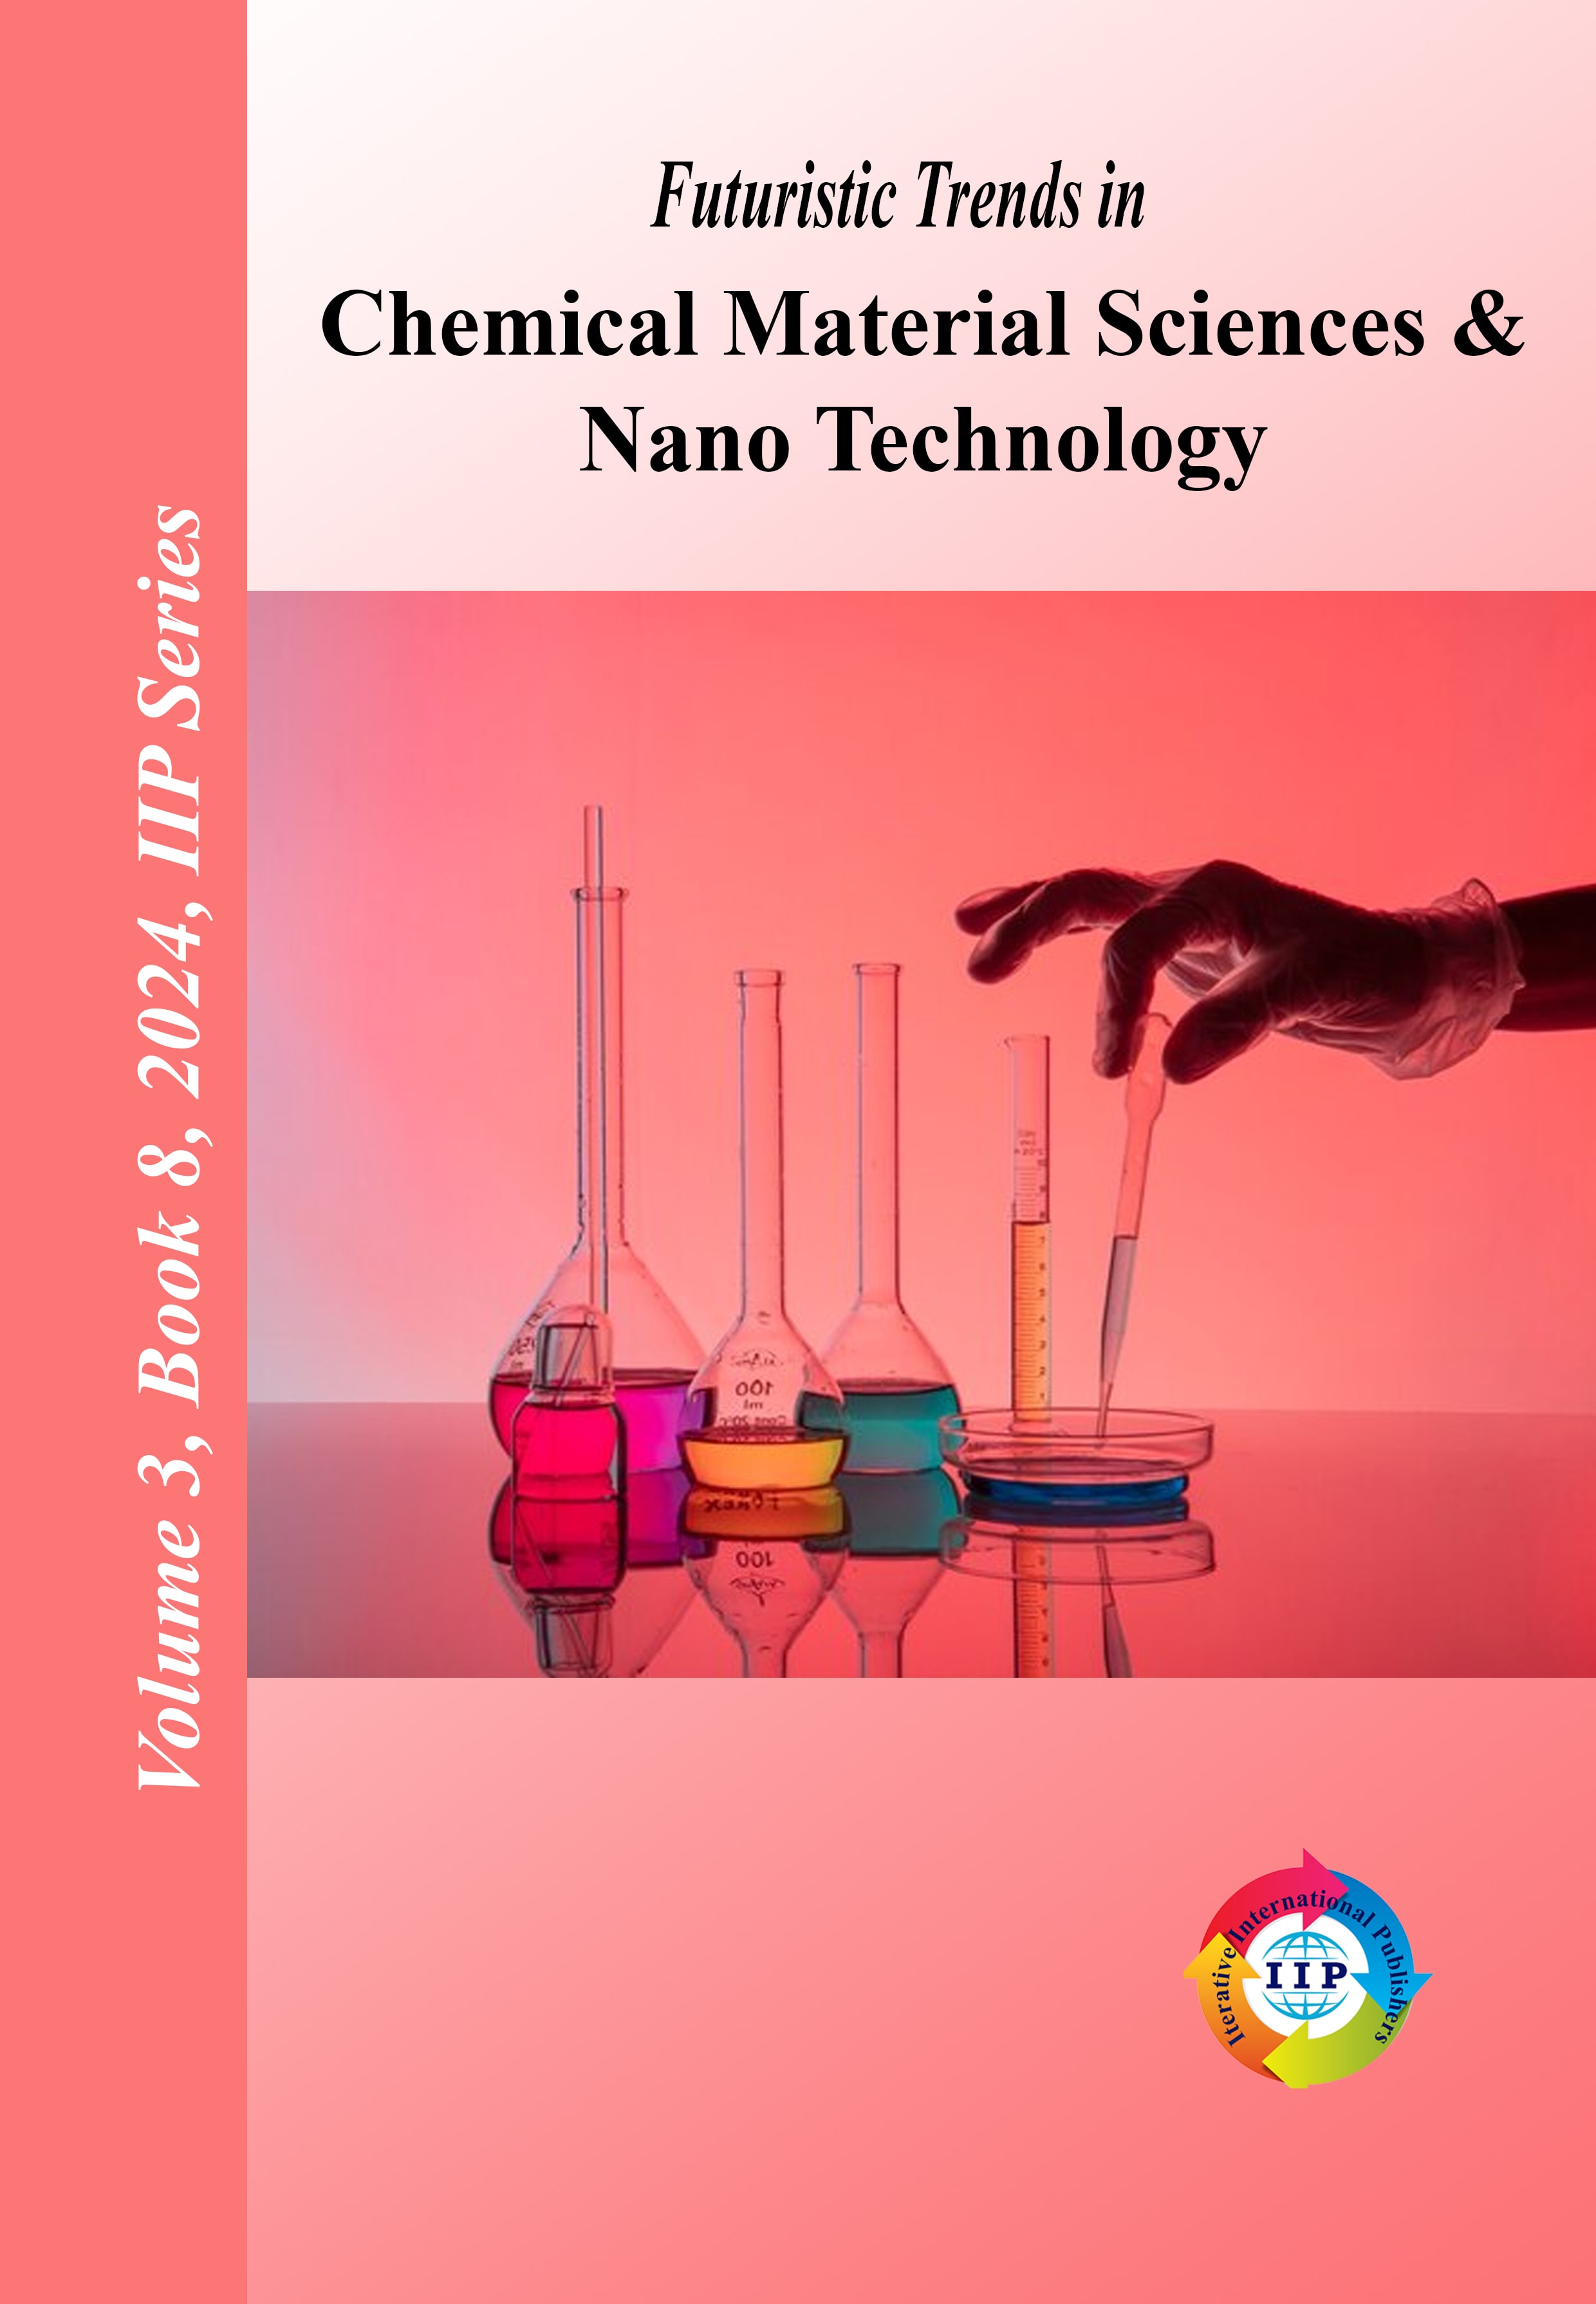 Futuristic Trends in Chemical Material Sciences & Nano Technology  Volume 3 Book 8